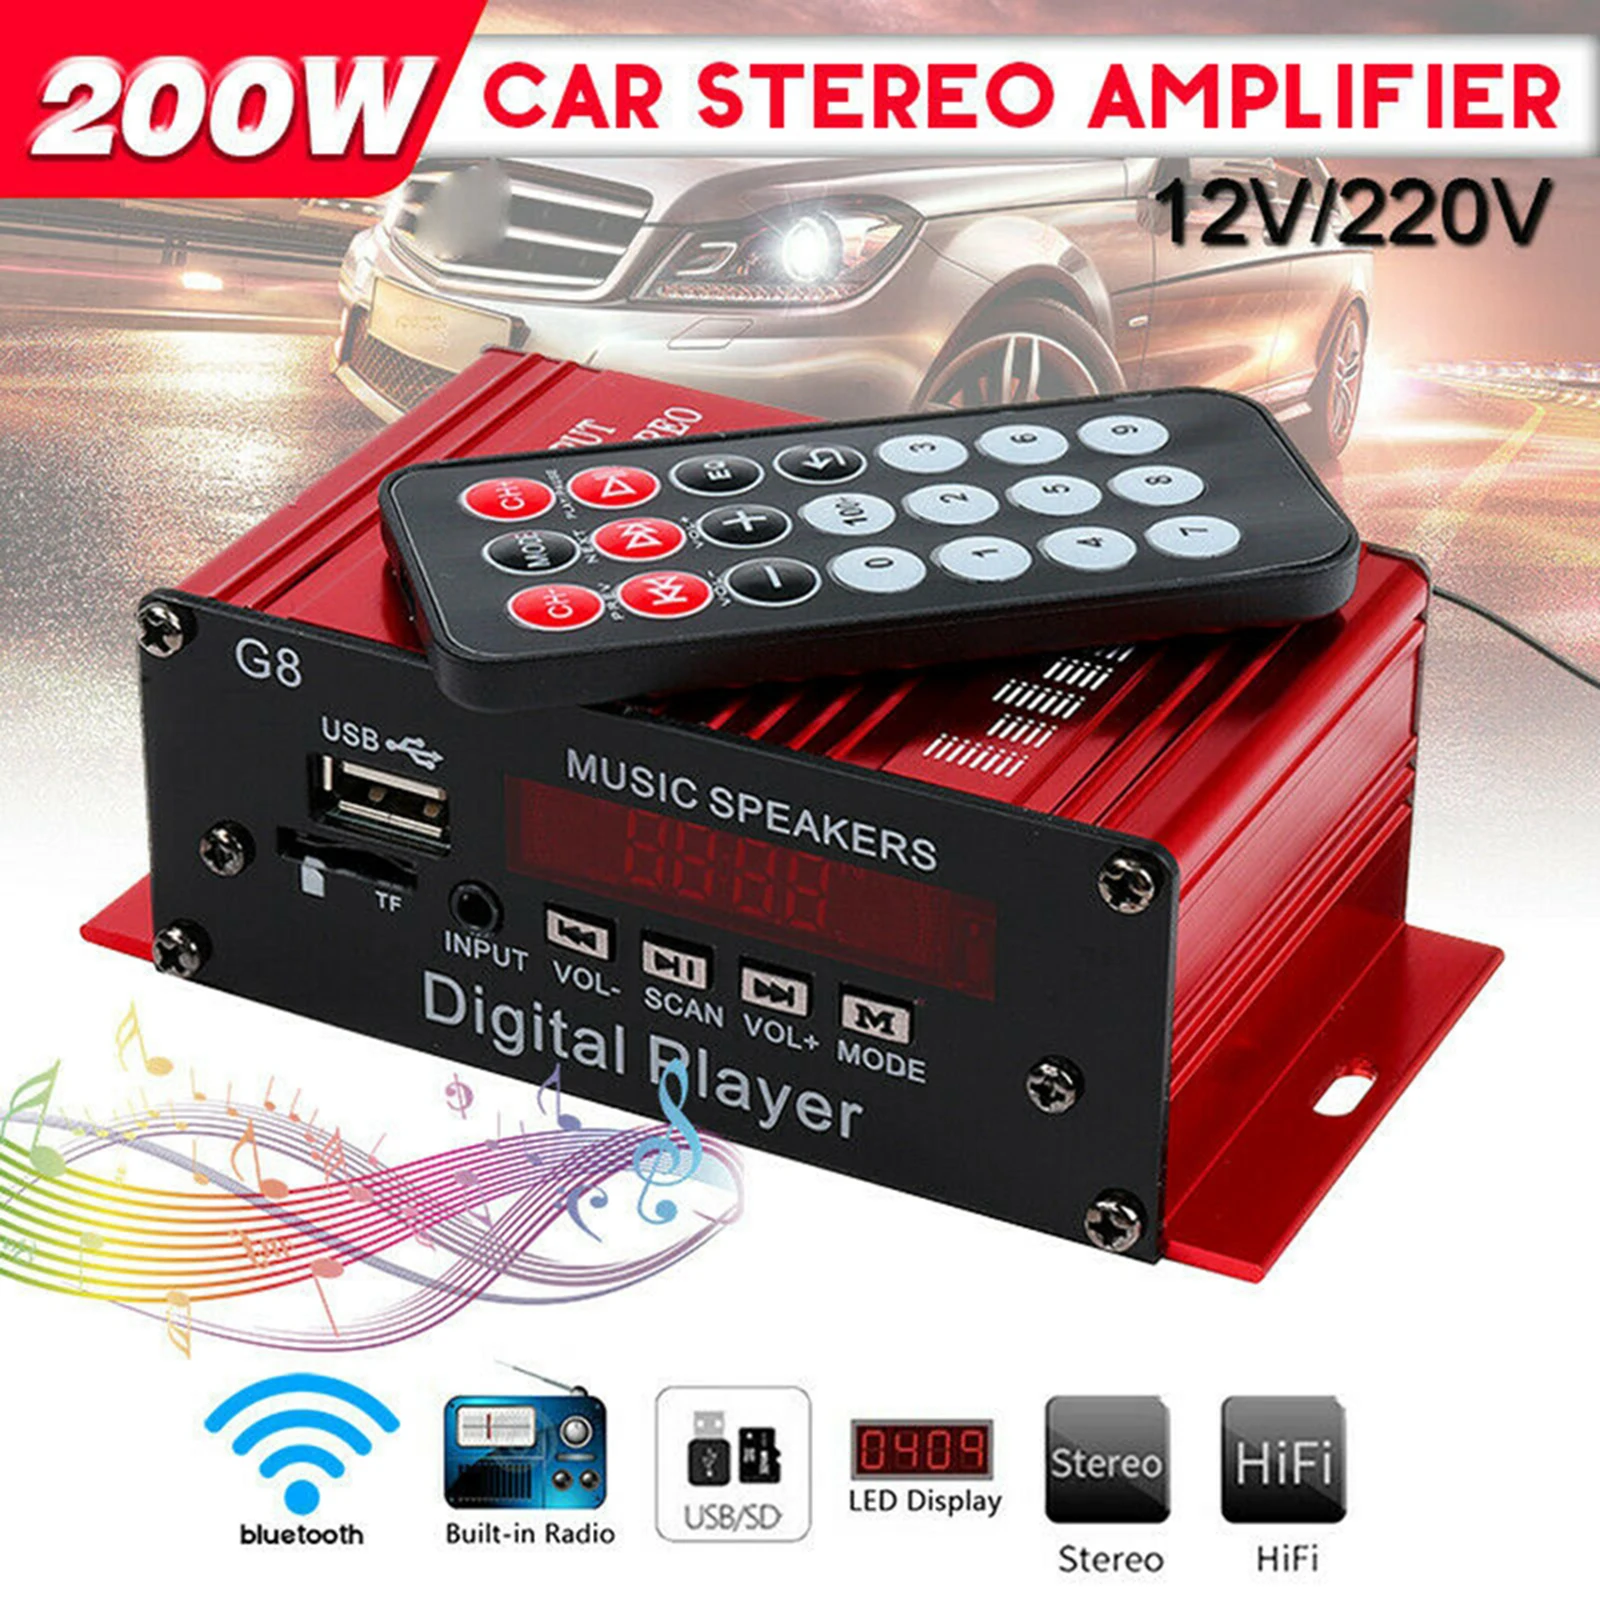 Primary image for Wireless Bluetooth Stereo Power Amplifier - 200W, 2 Channel, Remote Control